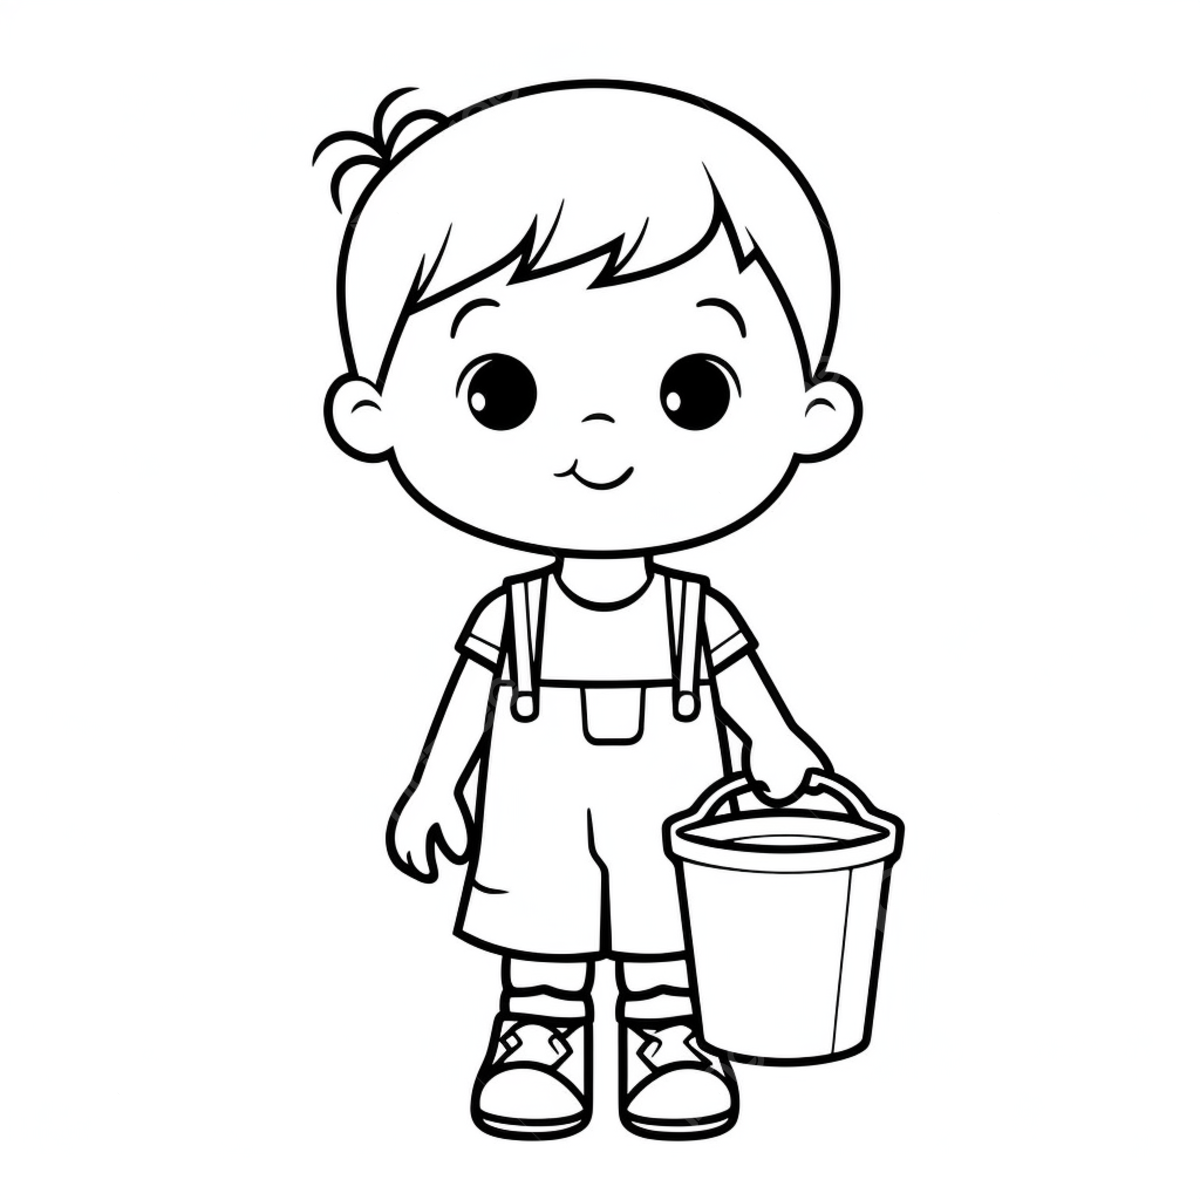 Little boy holding a bucket coloring page ring drawing bucket drawing color drawing png transparent image and clipart for free download